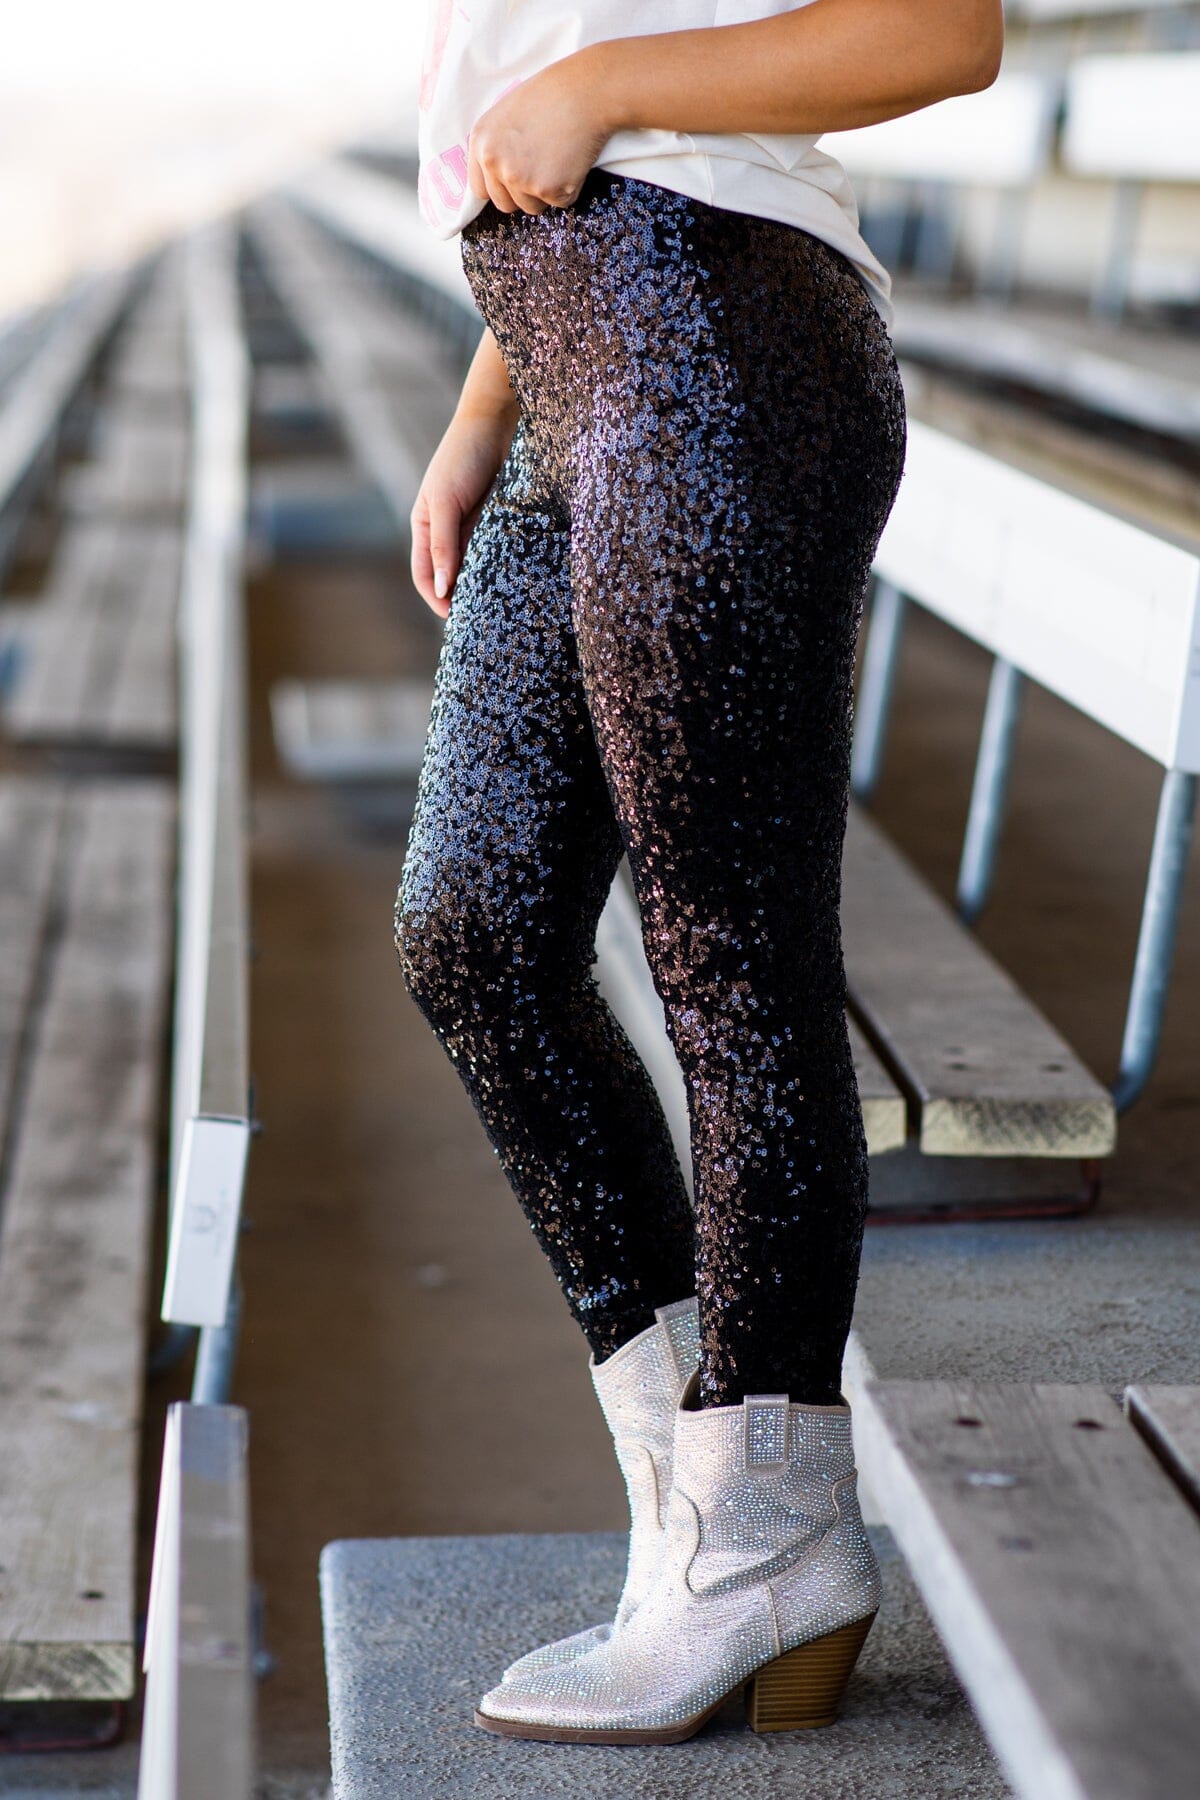 Black Sparkle Leggings by cupcakes and cashmere for $40